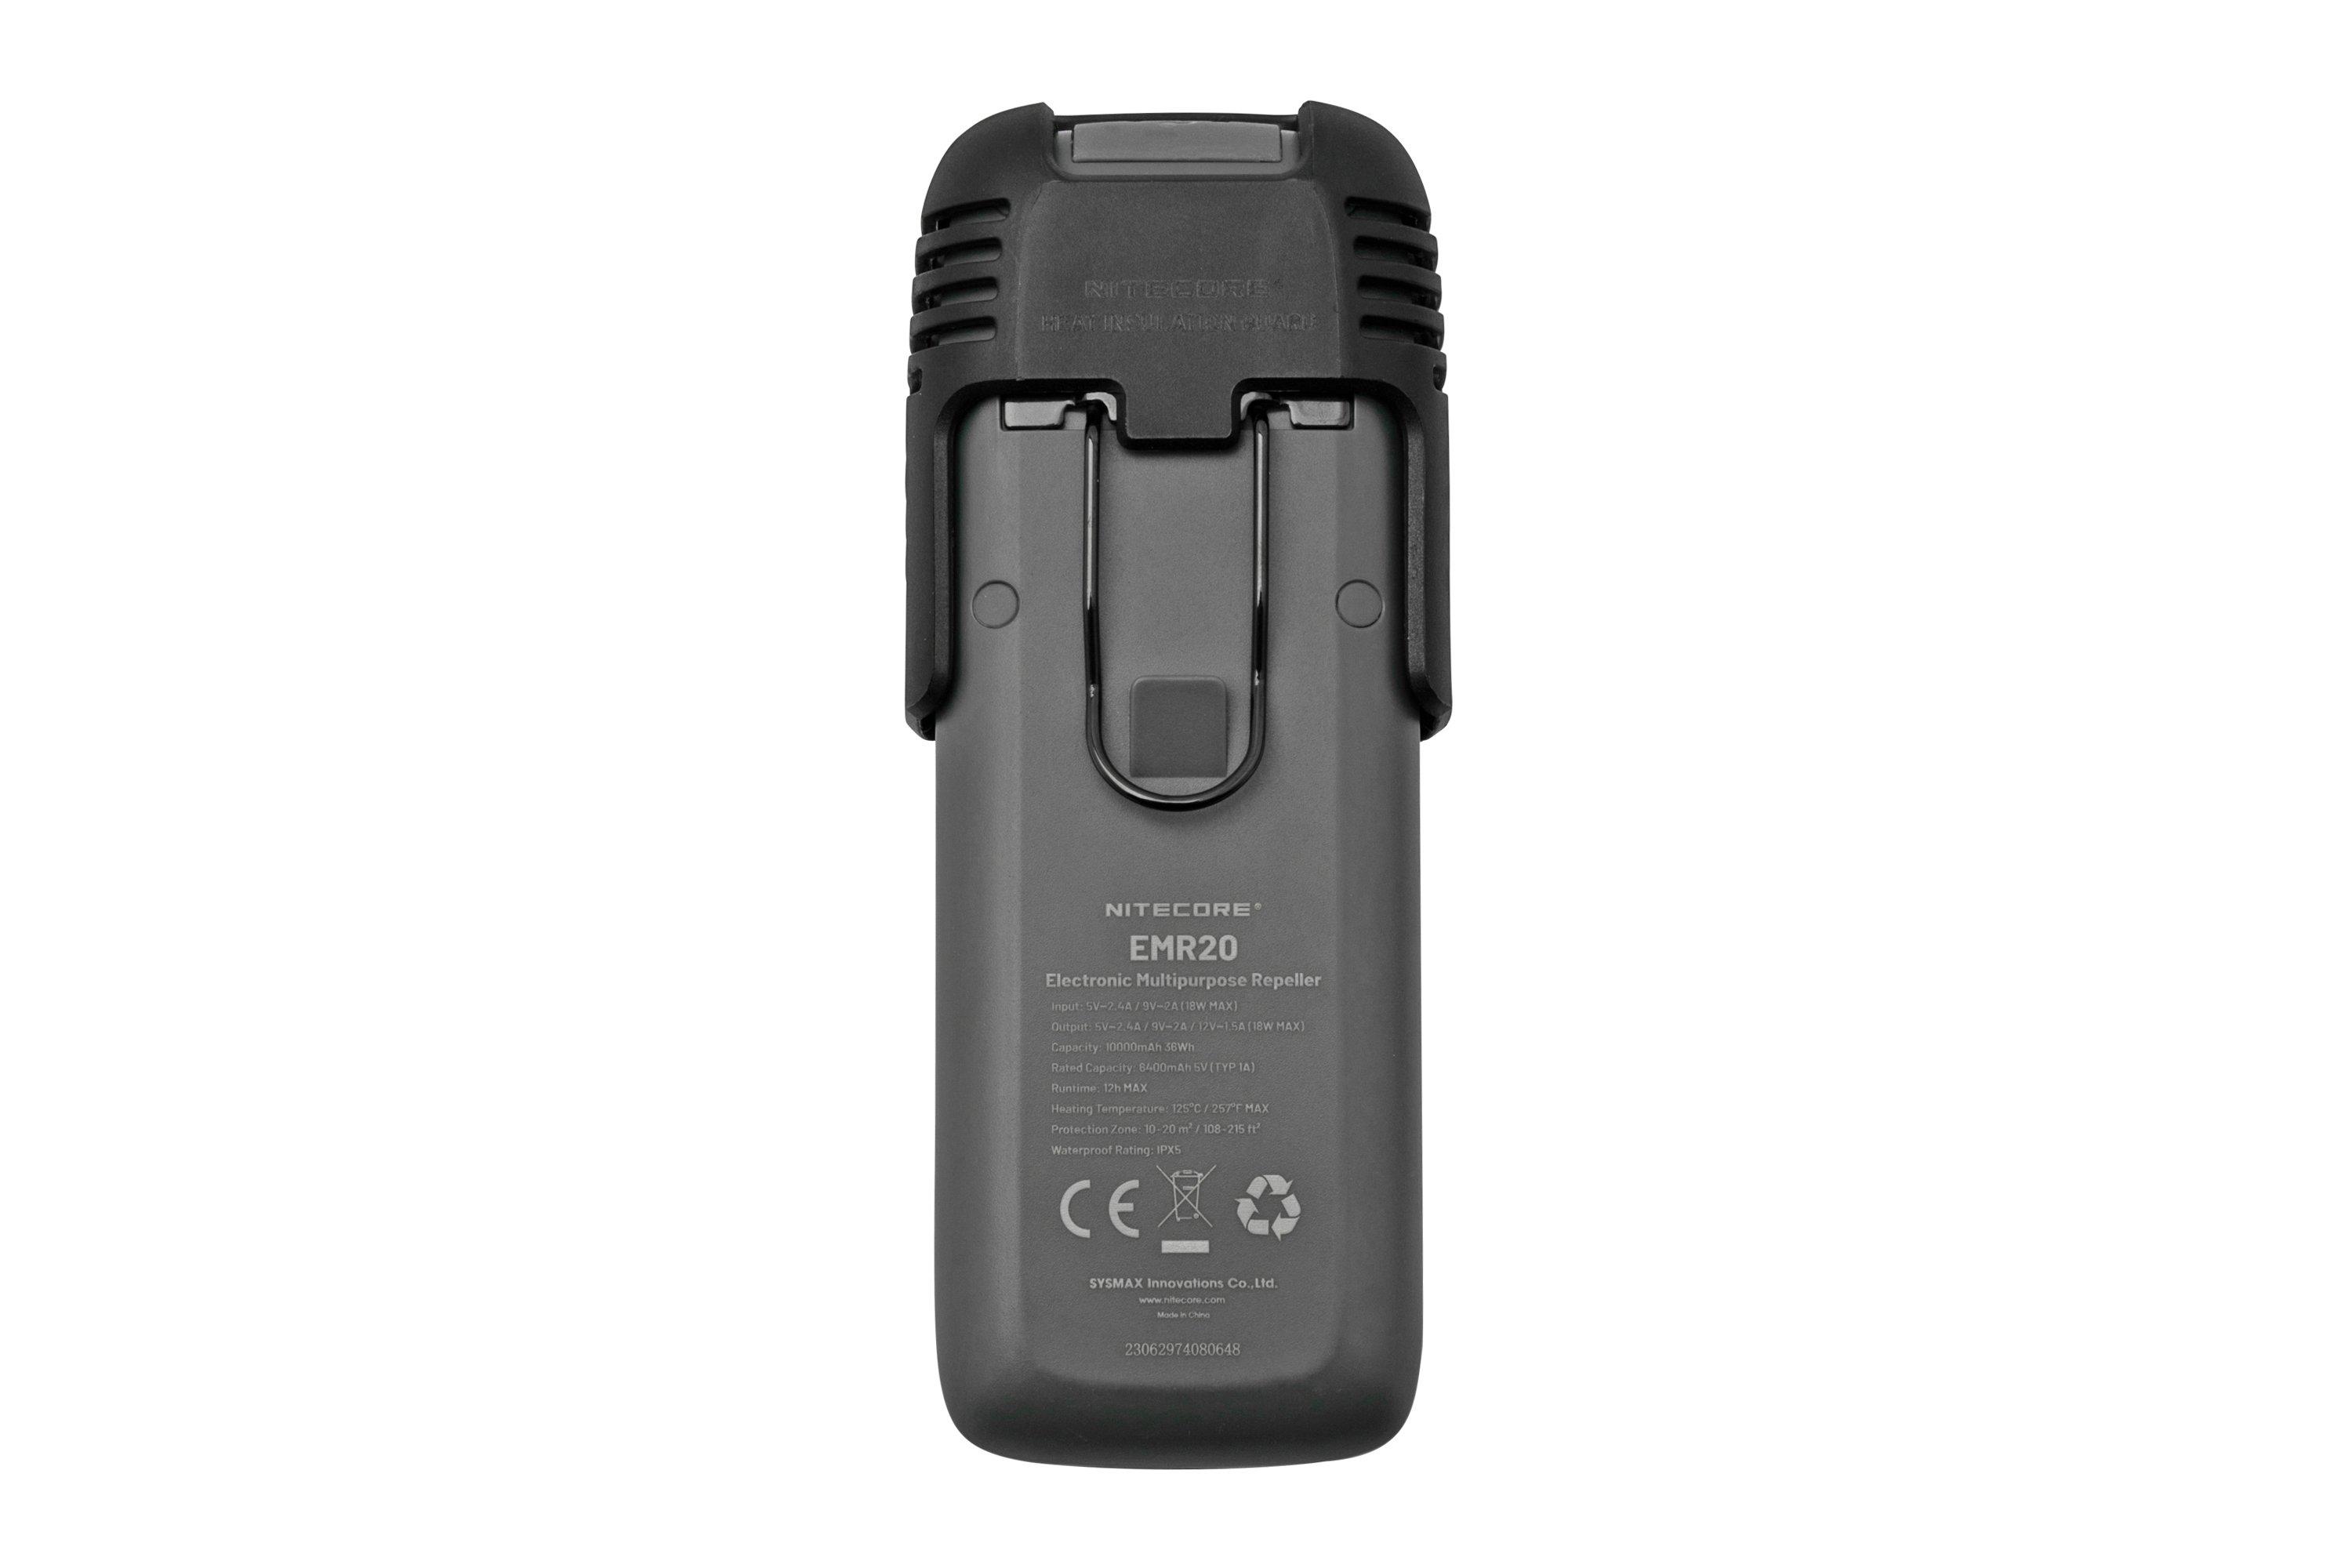  EMR20, mosquito repeller | Advantageously shopping at .